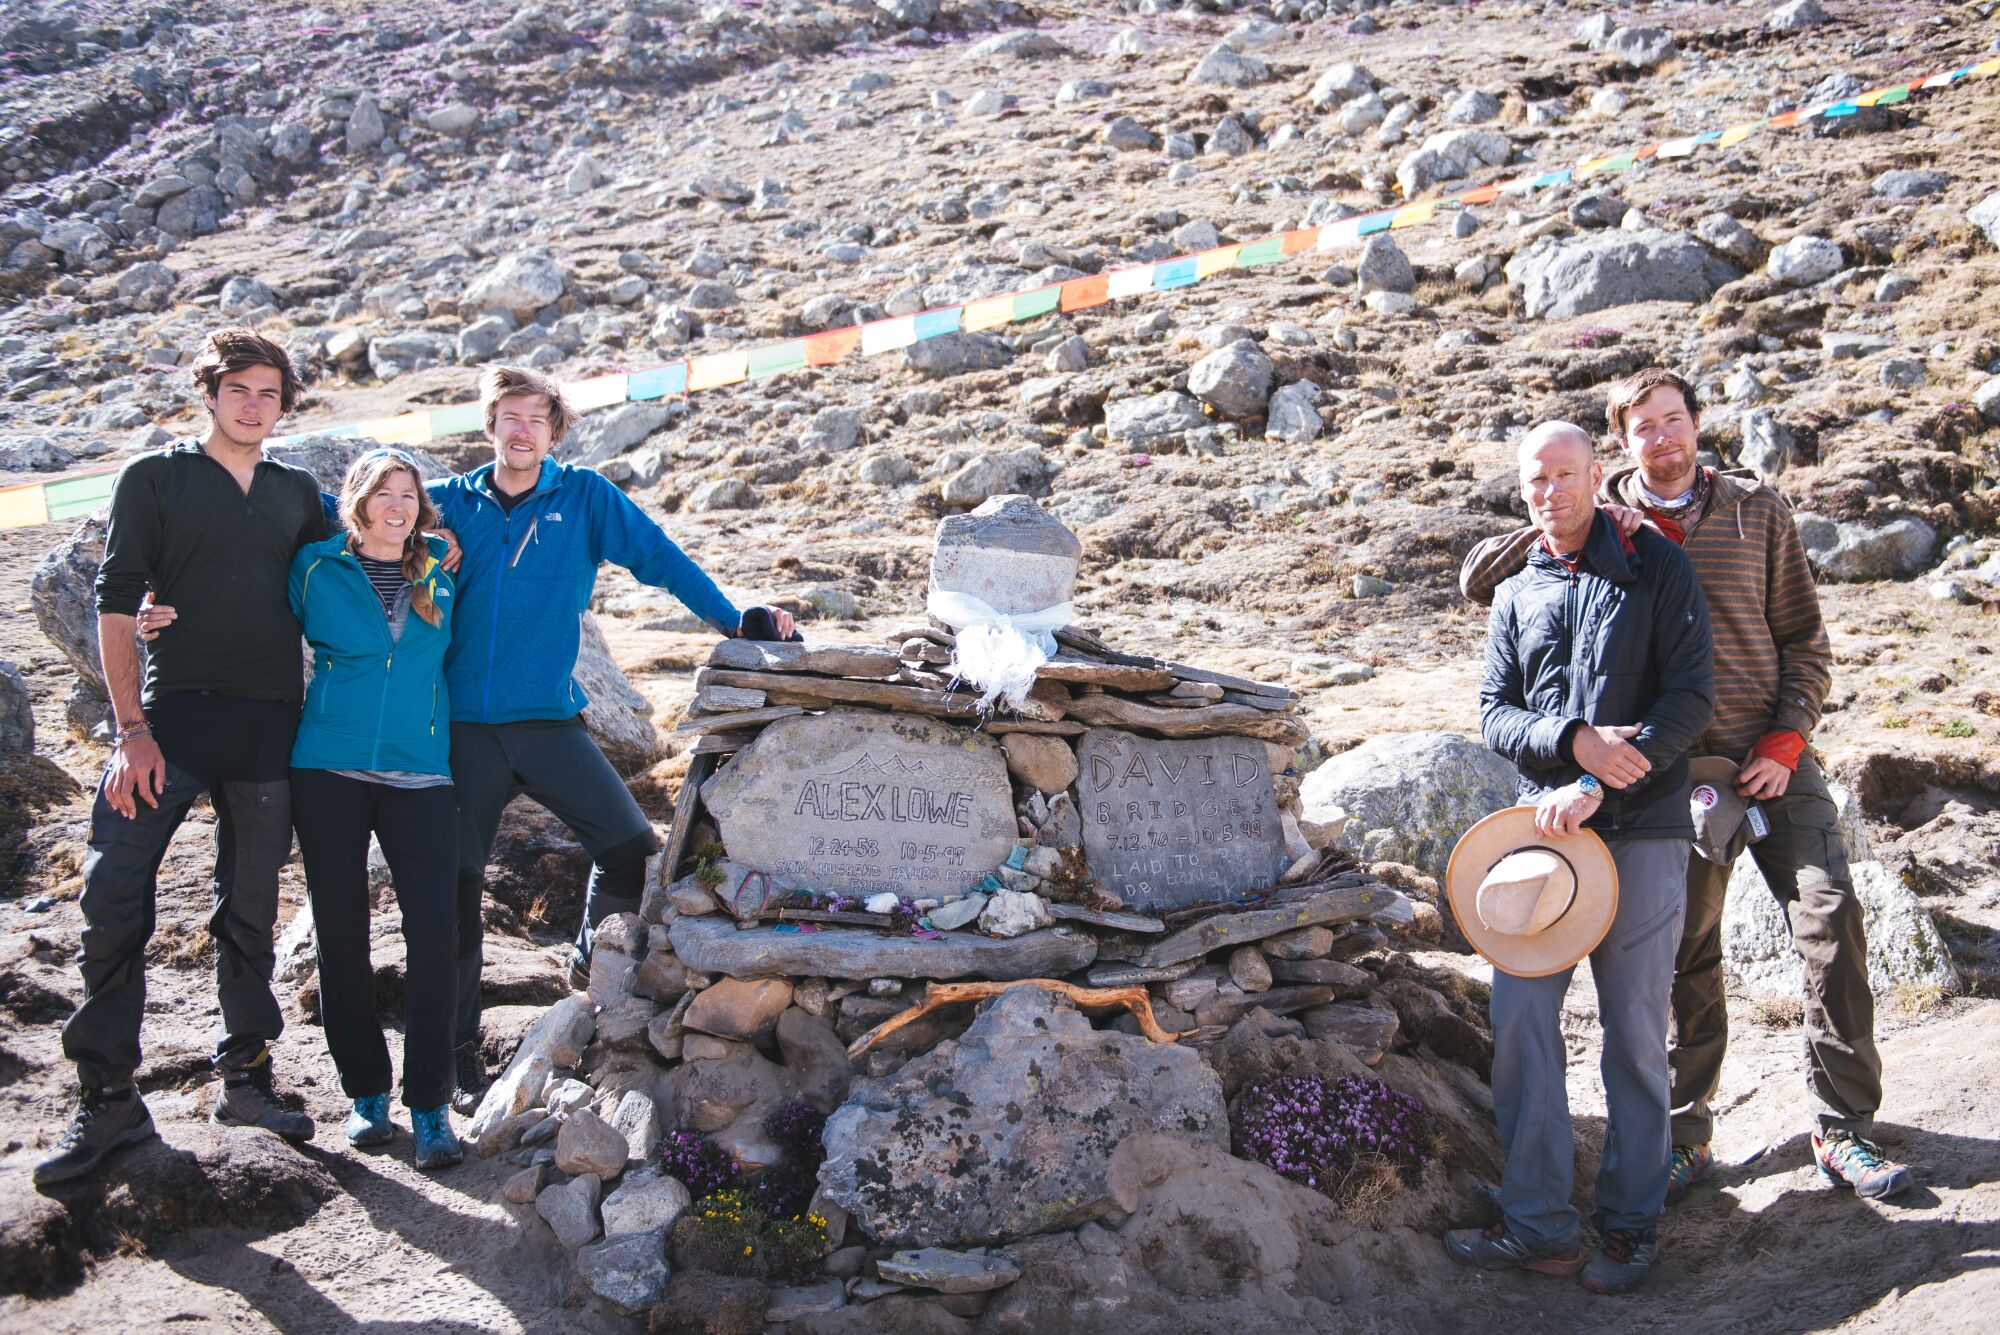 The Lowe-Anker family at the base camp of Shishapangma memorial site for Alex Lowe and David Bridges.